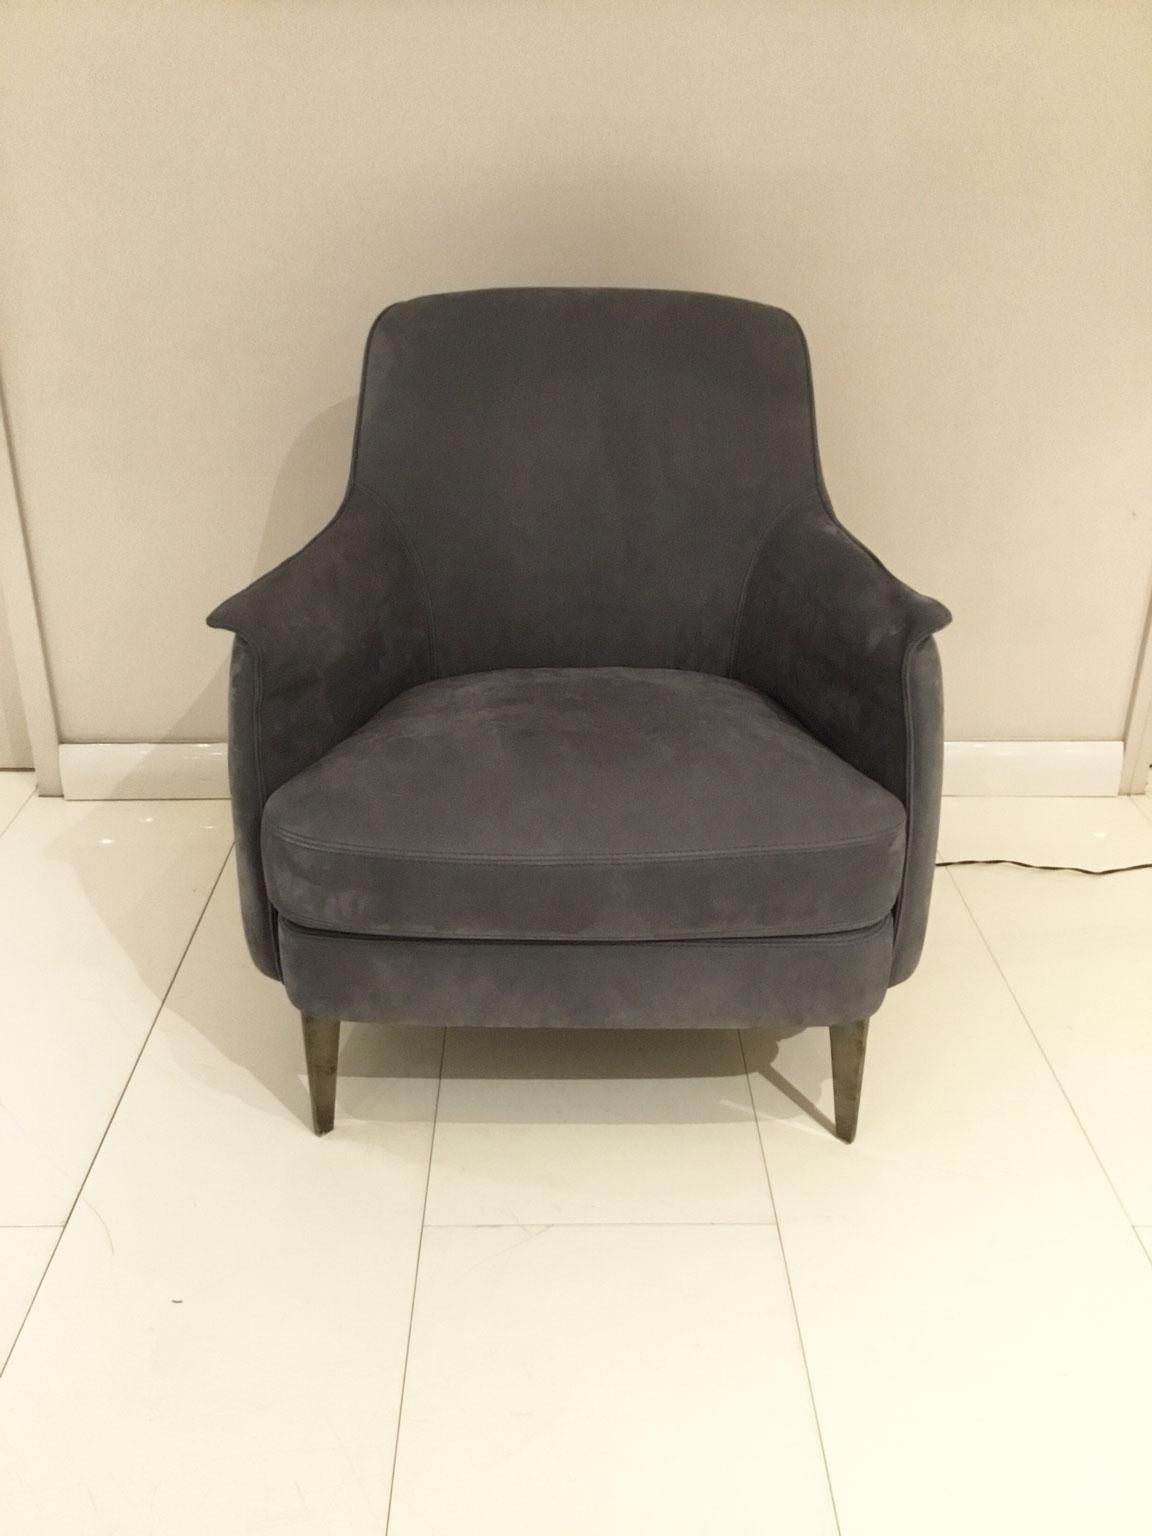 The design of this model successfully combines the elegance of the past with modern inspirations in order to offer a comfortable and classy armchair - suitable for the most elegant environments.
Its harmonious lines provide safe and comfortable